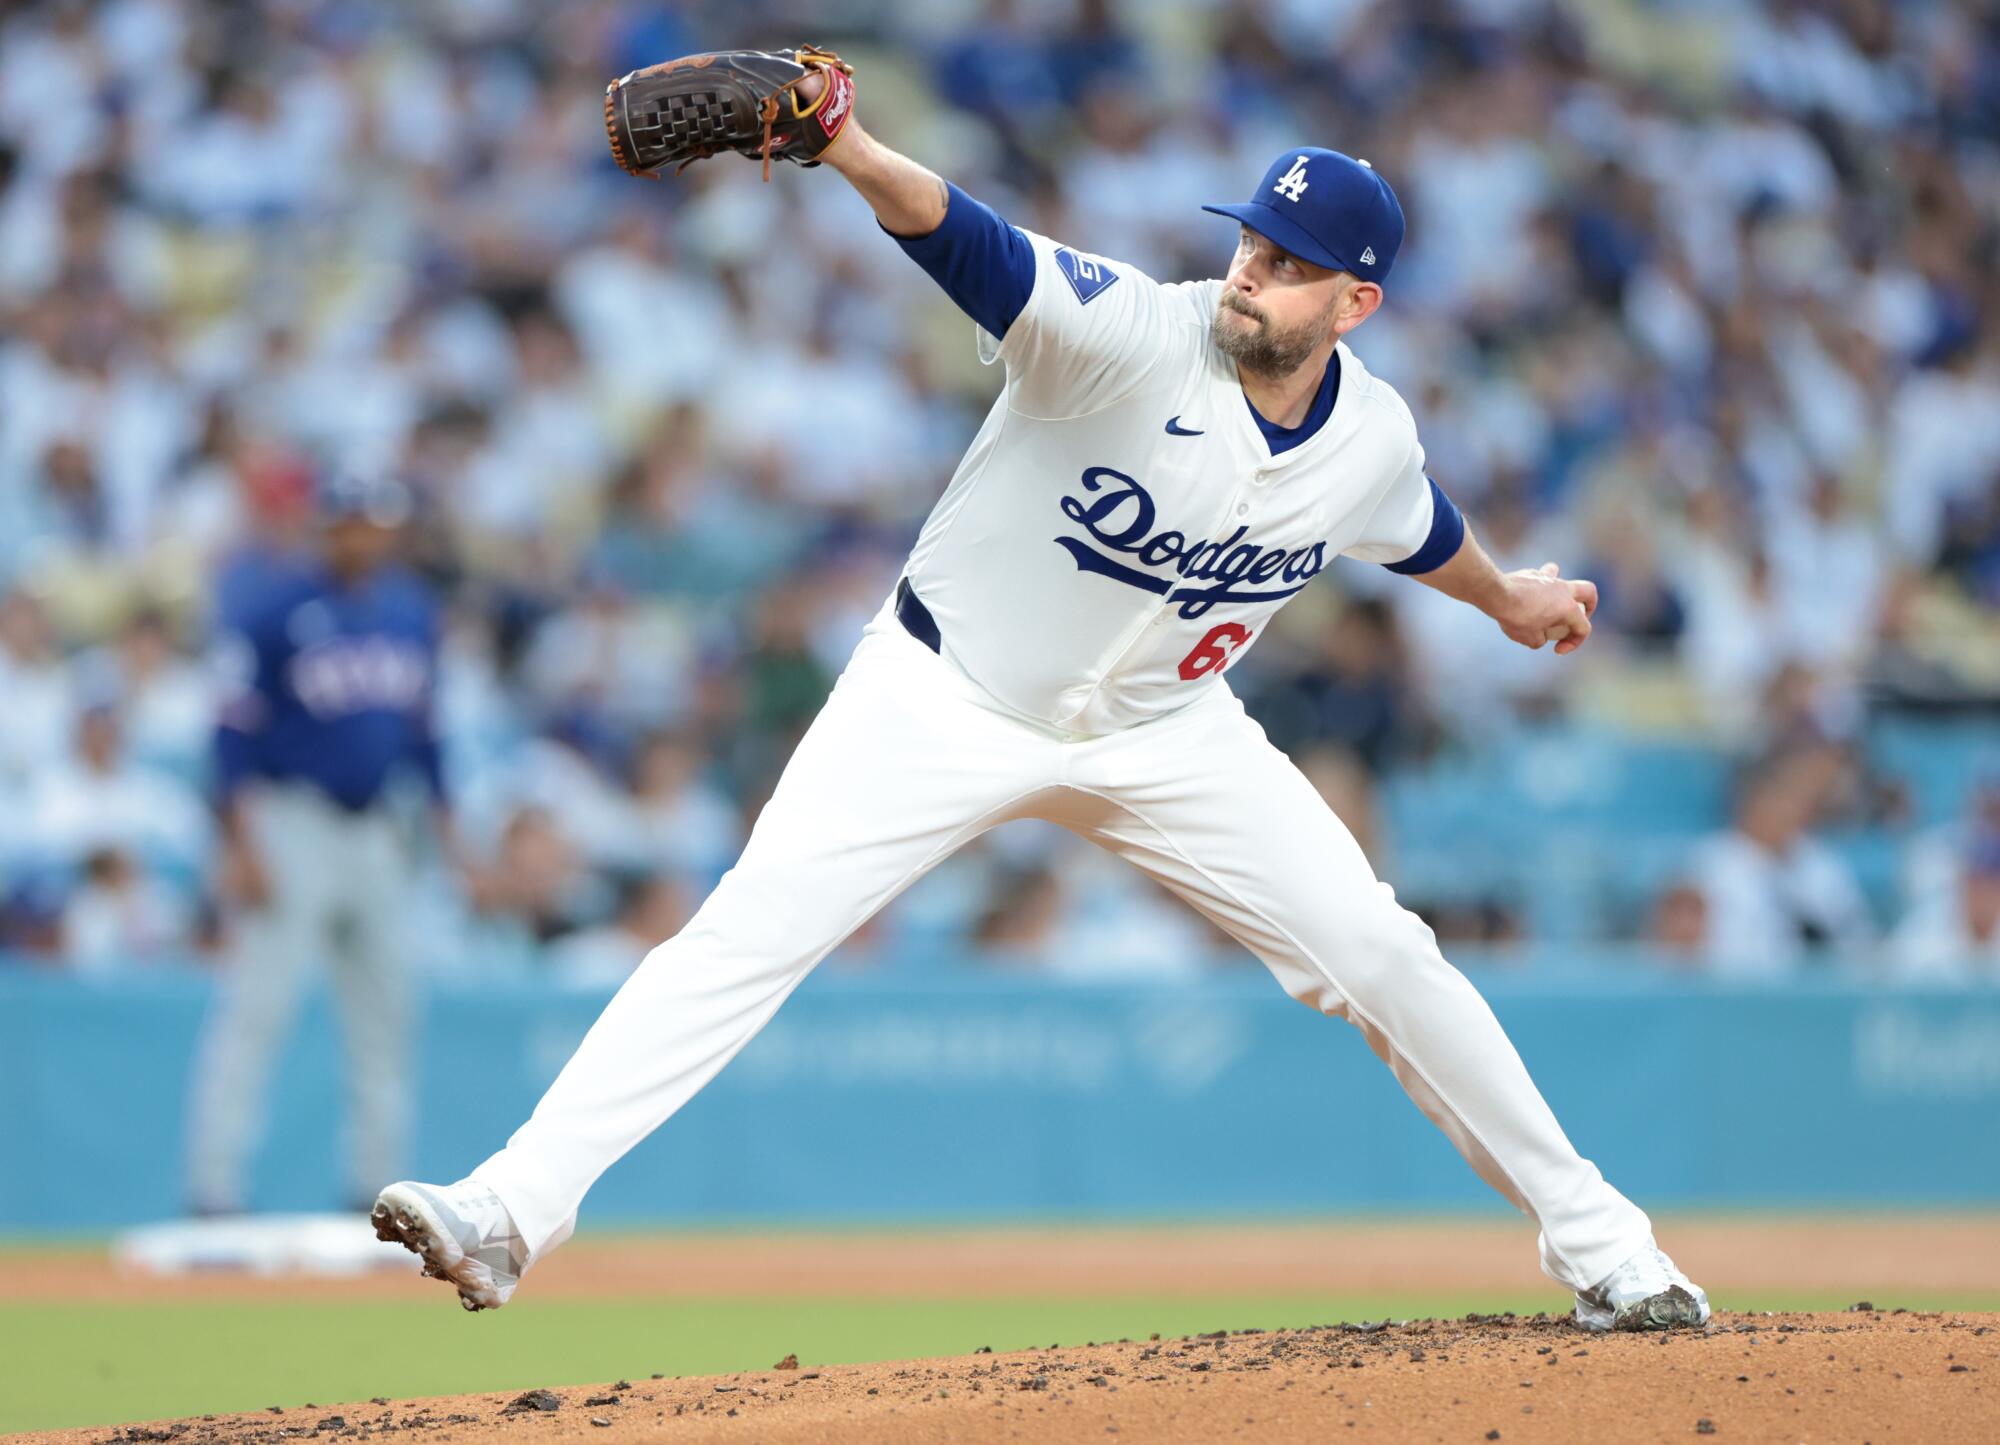 Dodgers pitcher James Paxton delivers against the Texas Rangers in June.